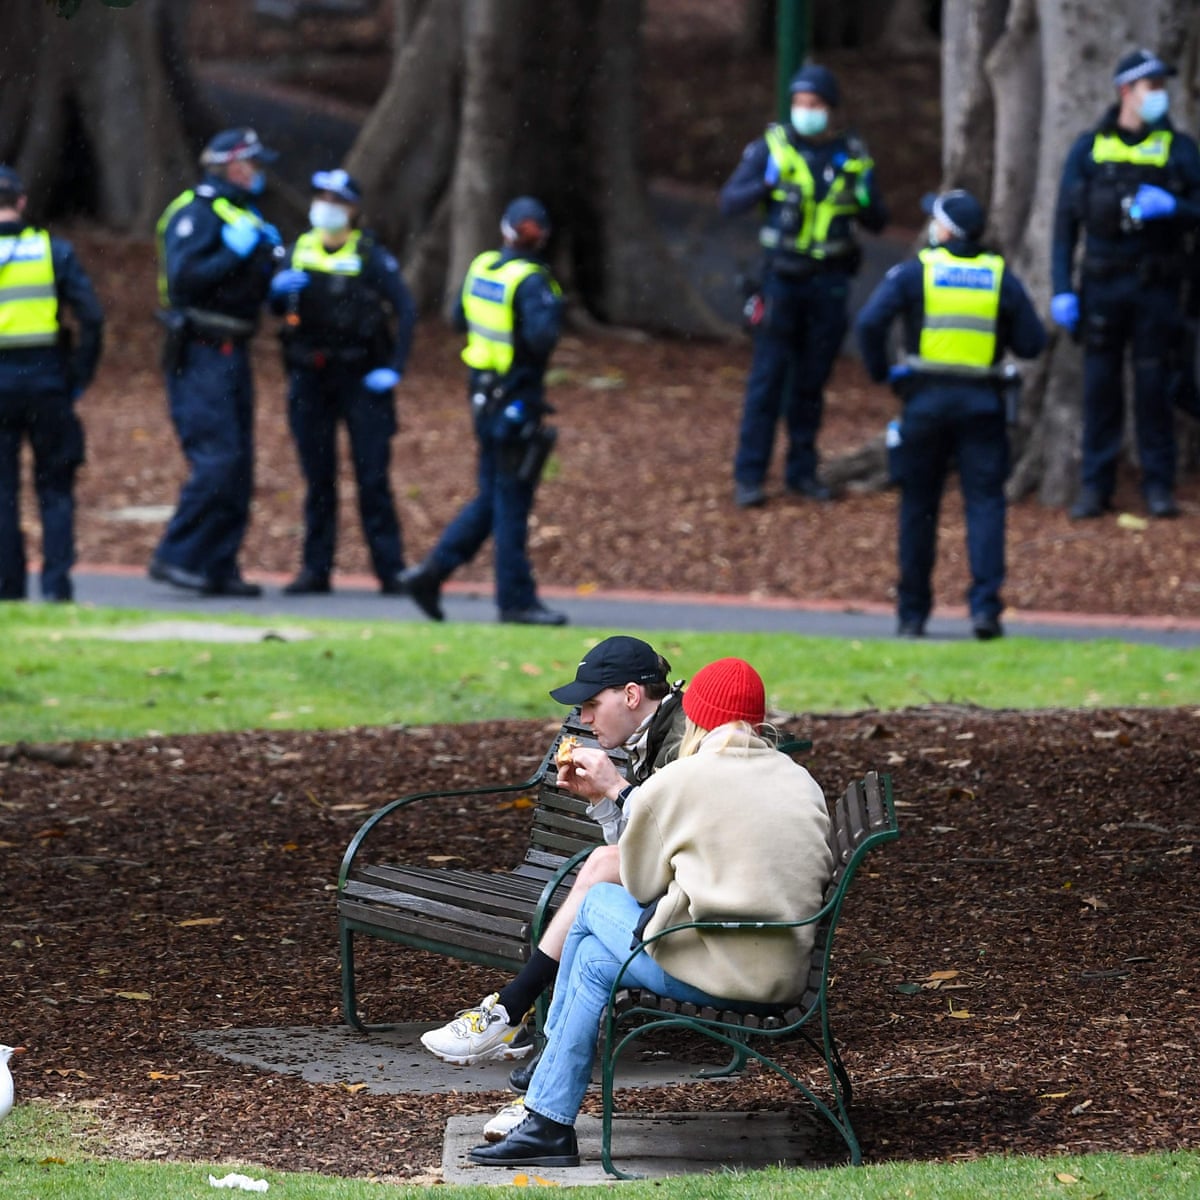 Sudanese and Aboriginal people overrepresented in fines from Victoria police  during first lockdown | Victoria | The Guardian